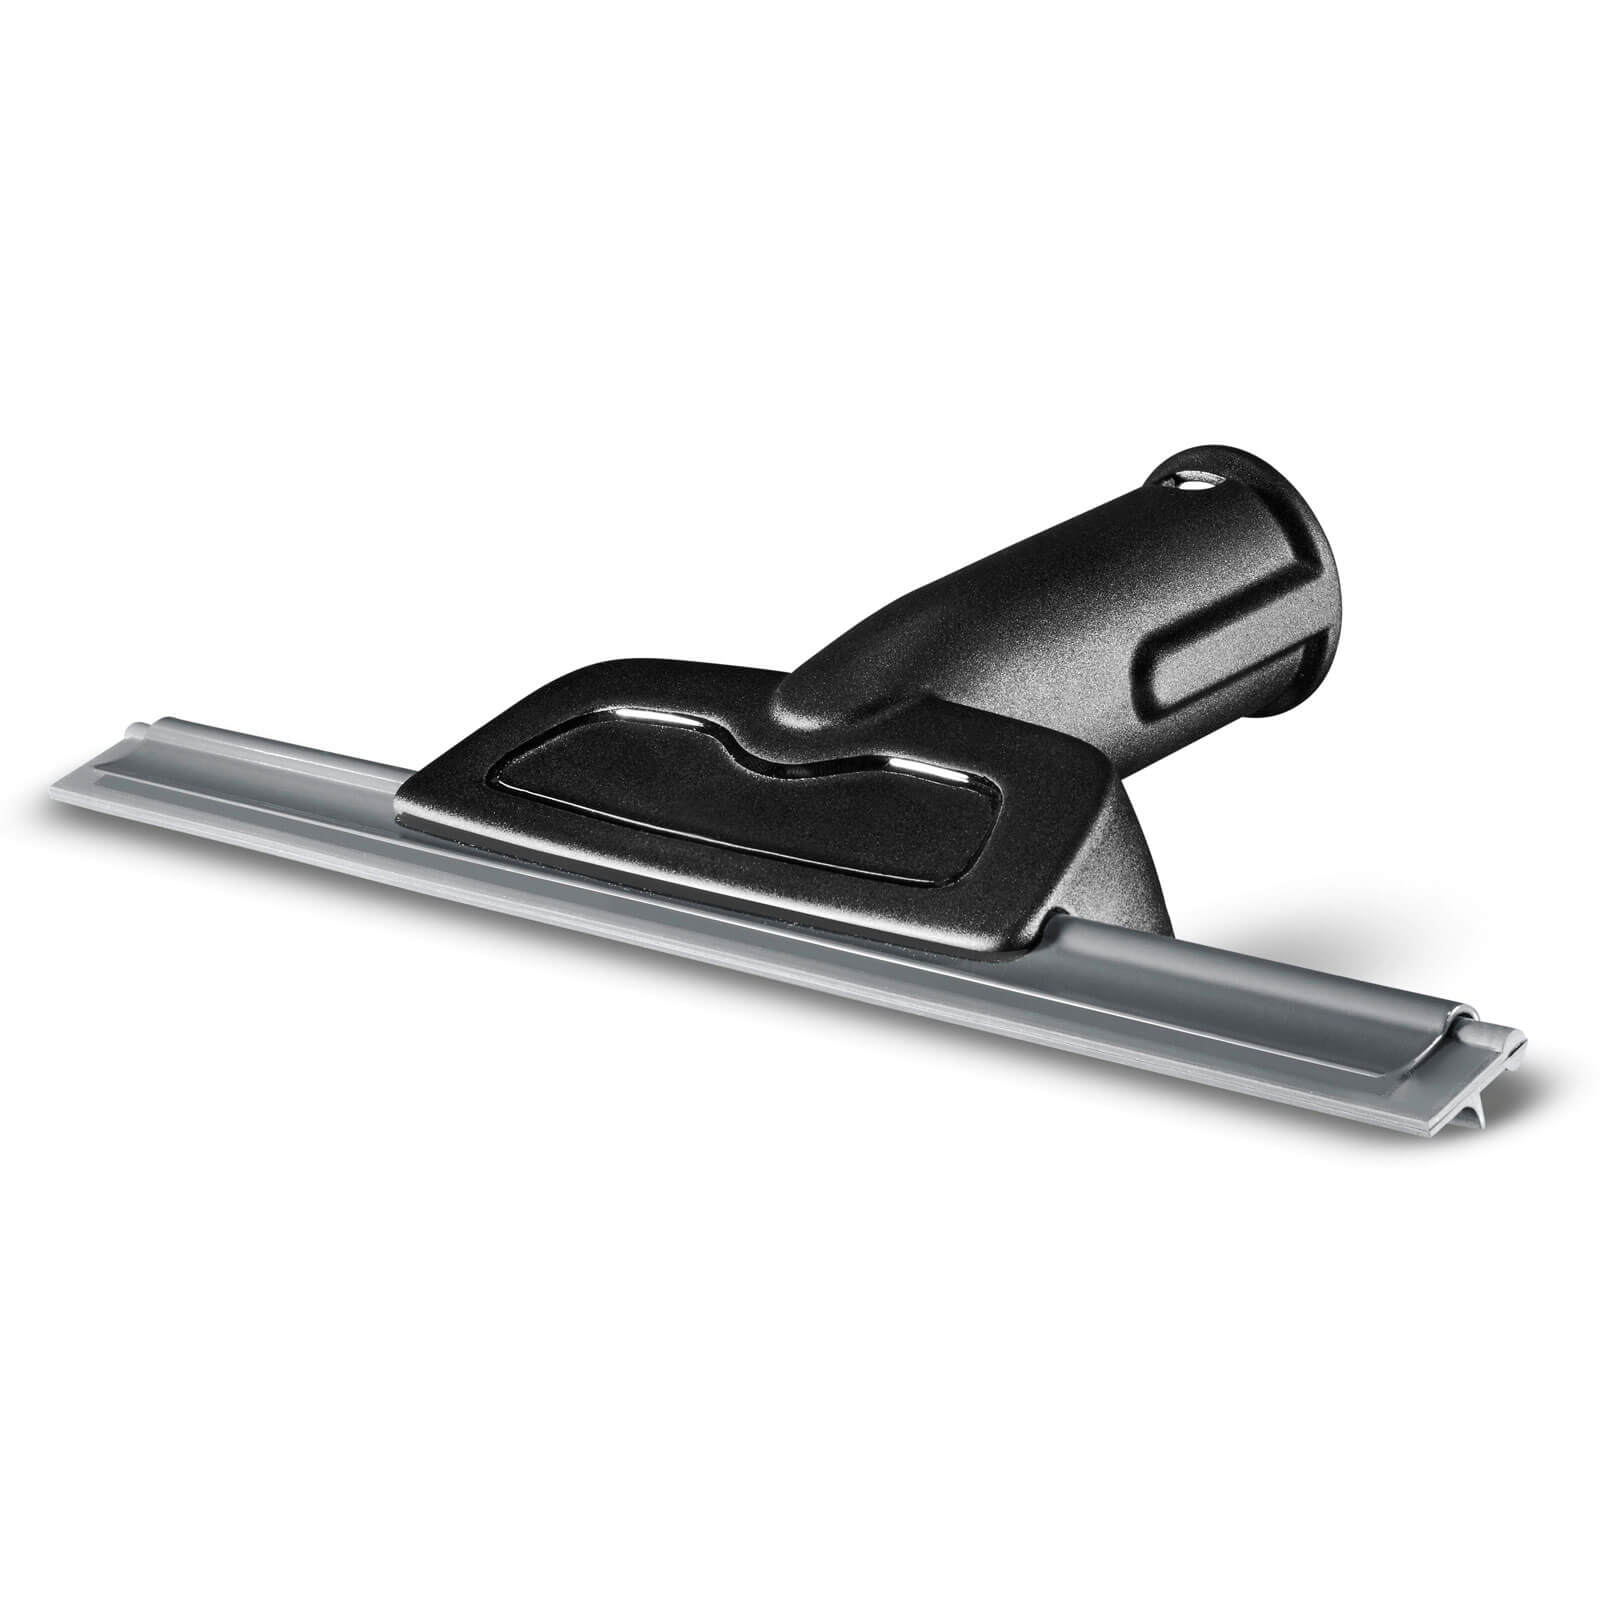 Karcher Window Tool for SC & DE 4002 Steam Cleaners